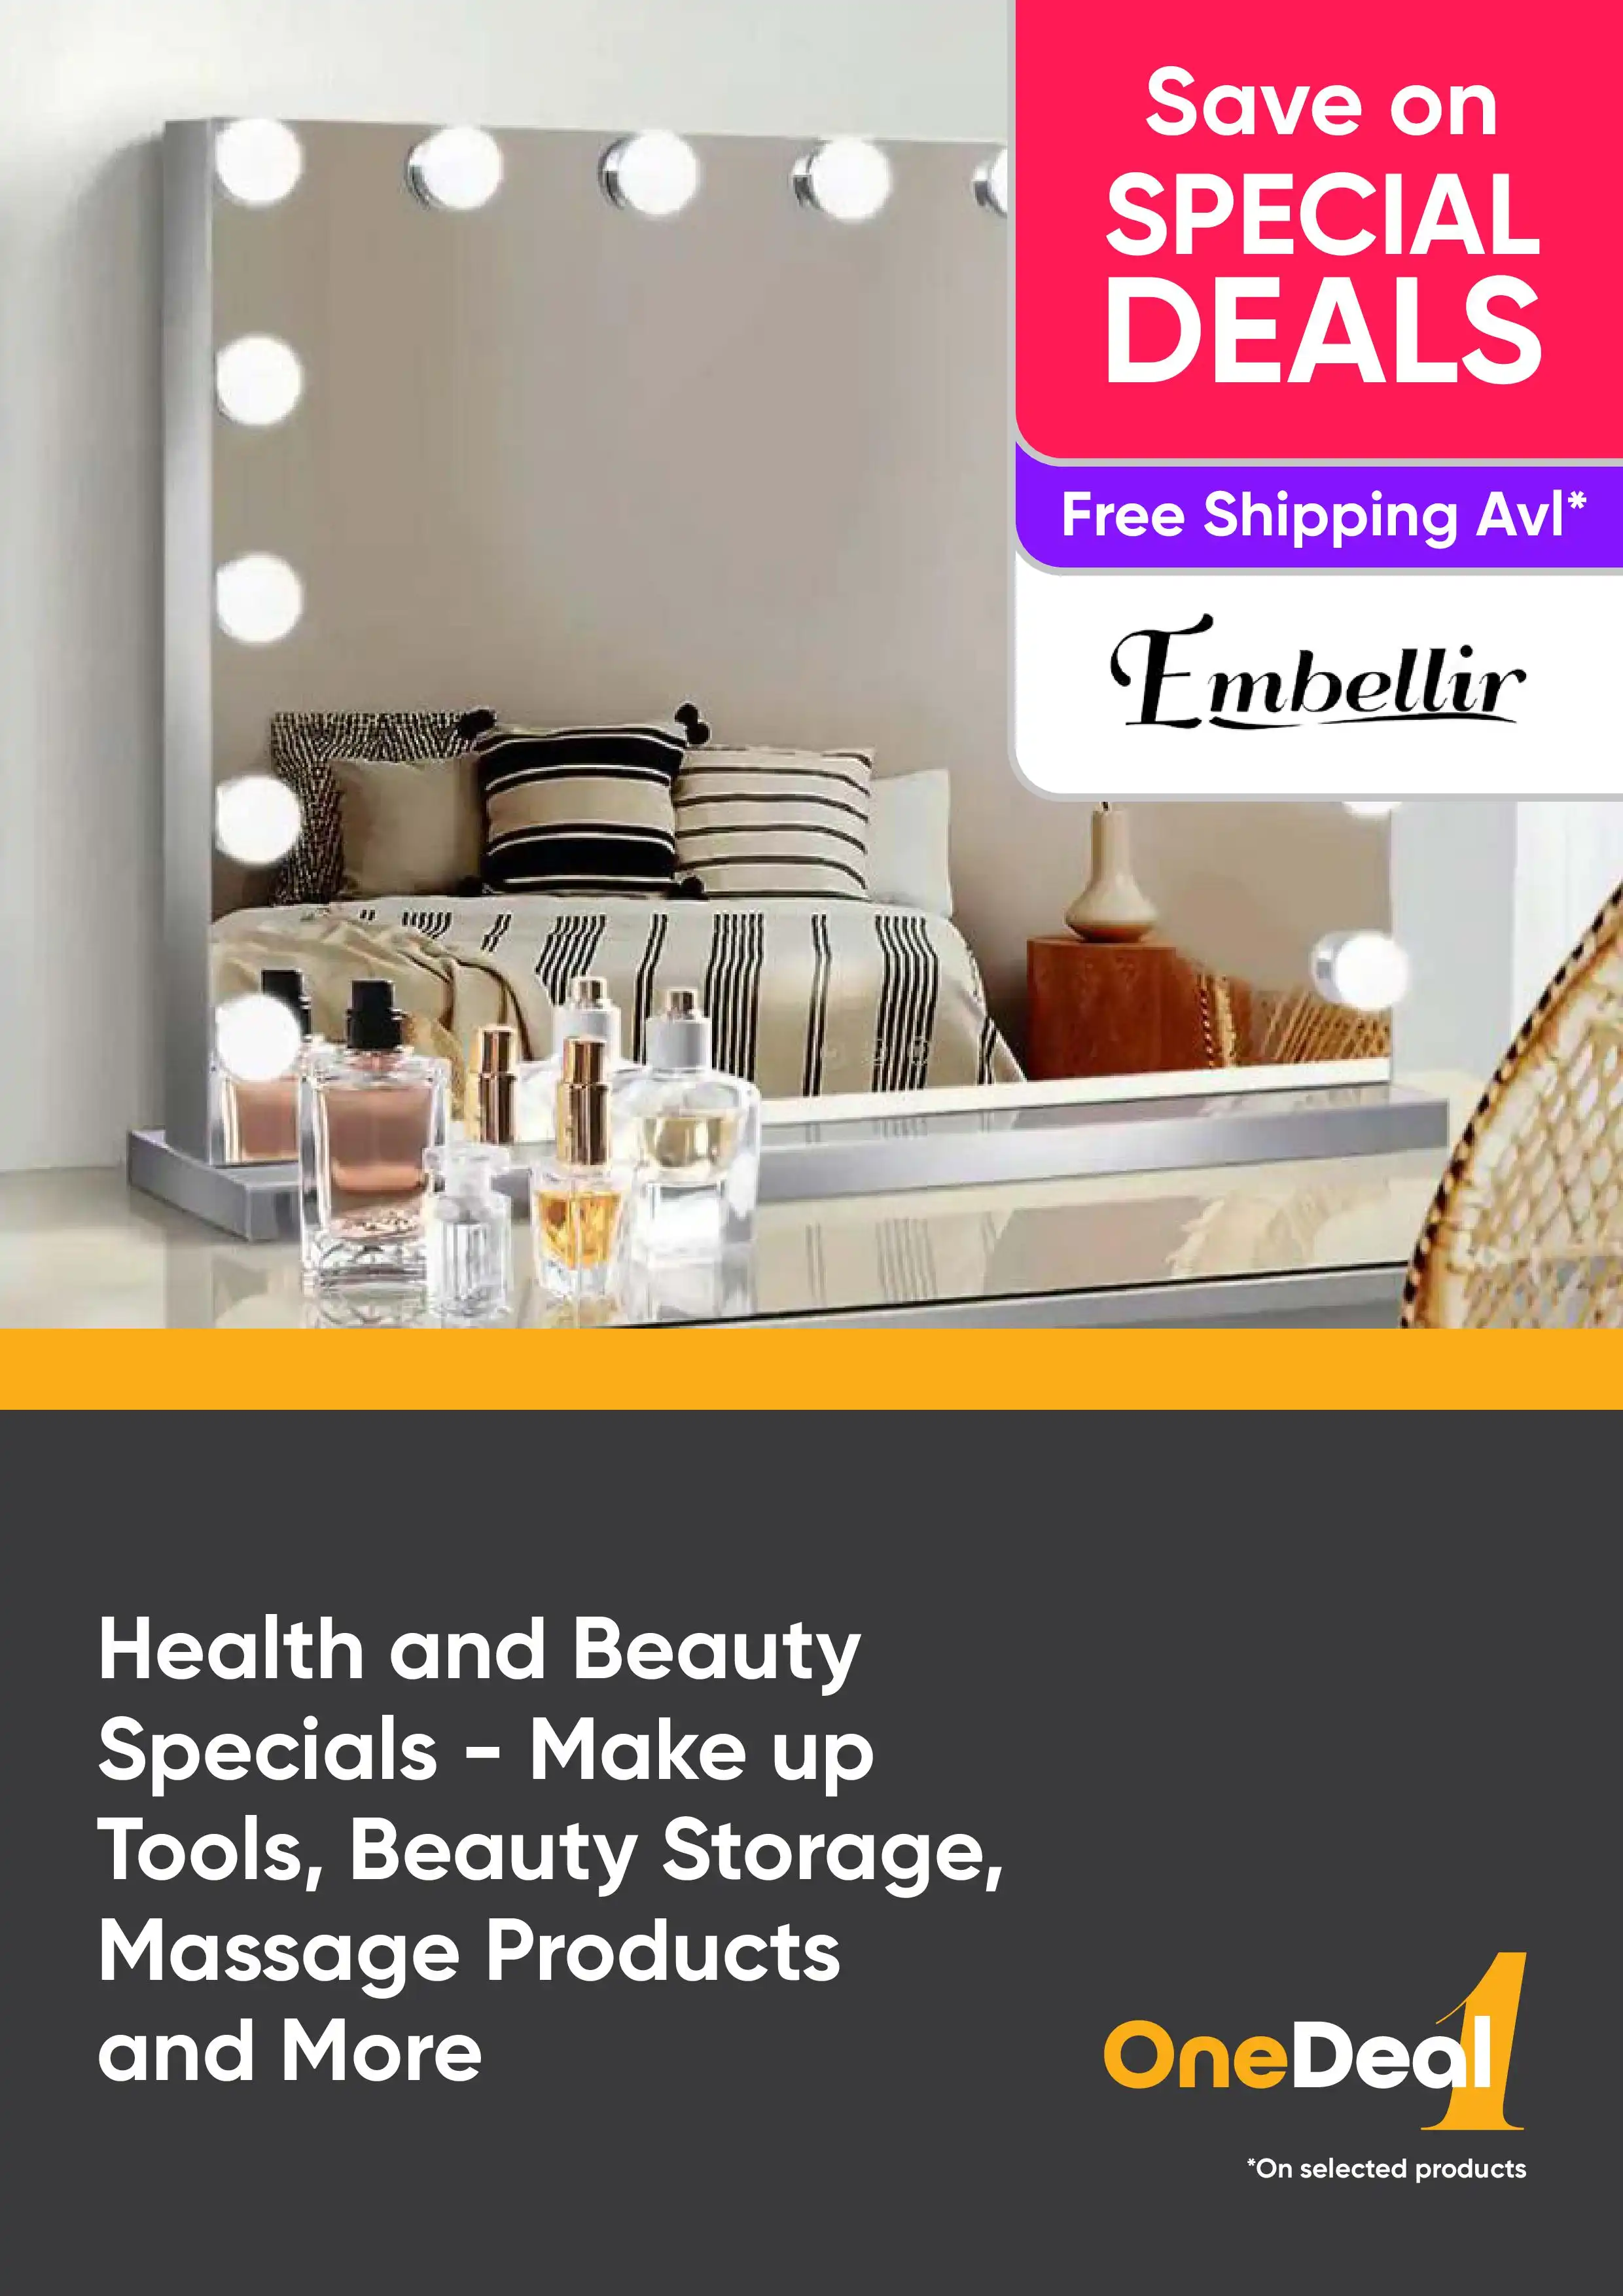 Health and Beauty Specials - Make Up Tools, Beauty Storage, Massage Products and More